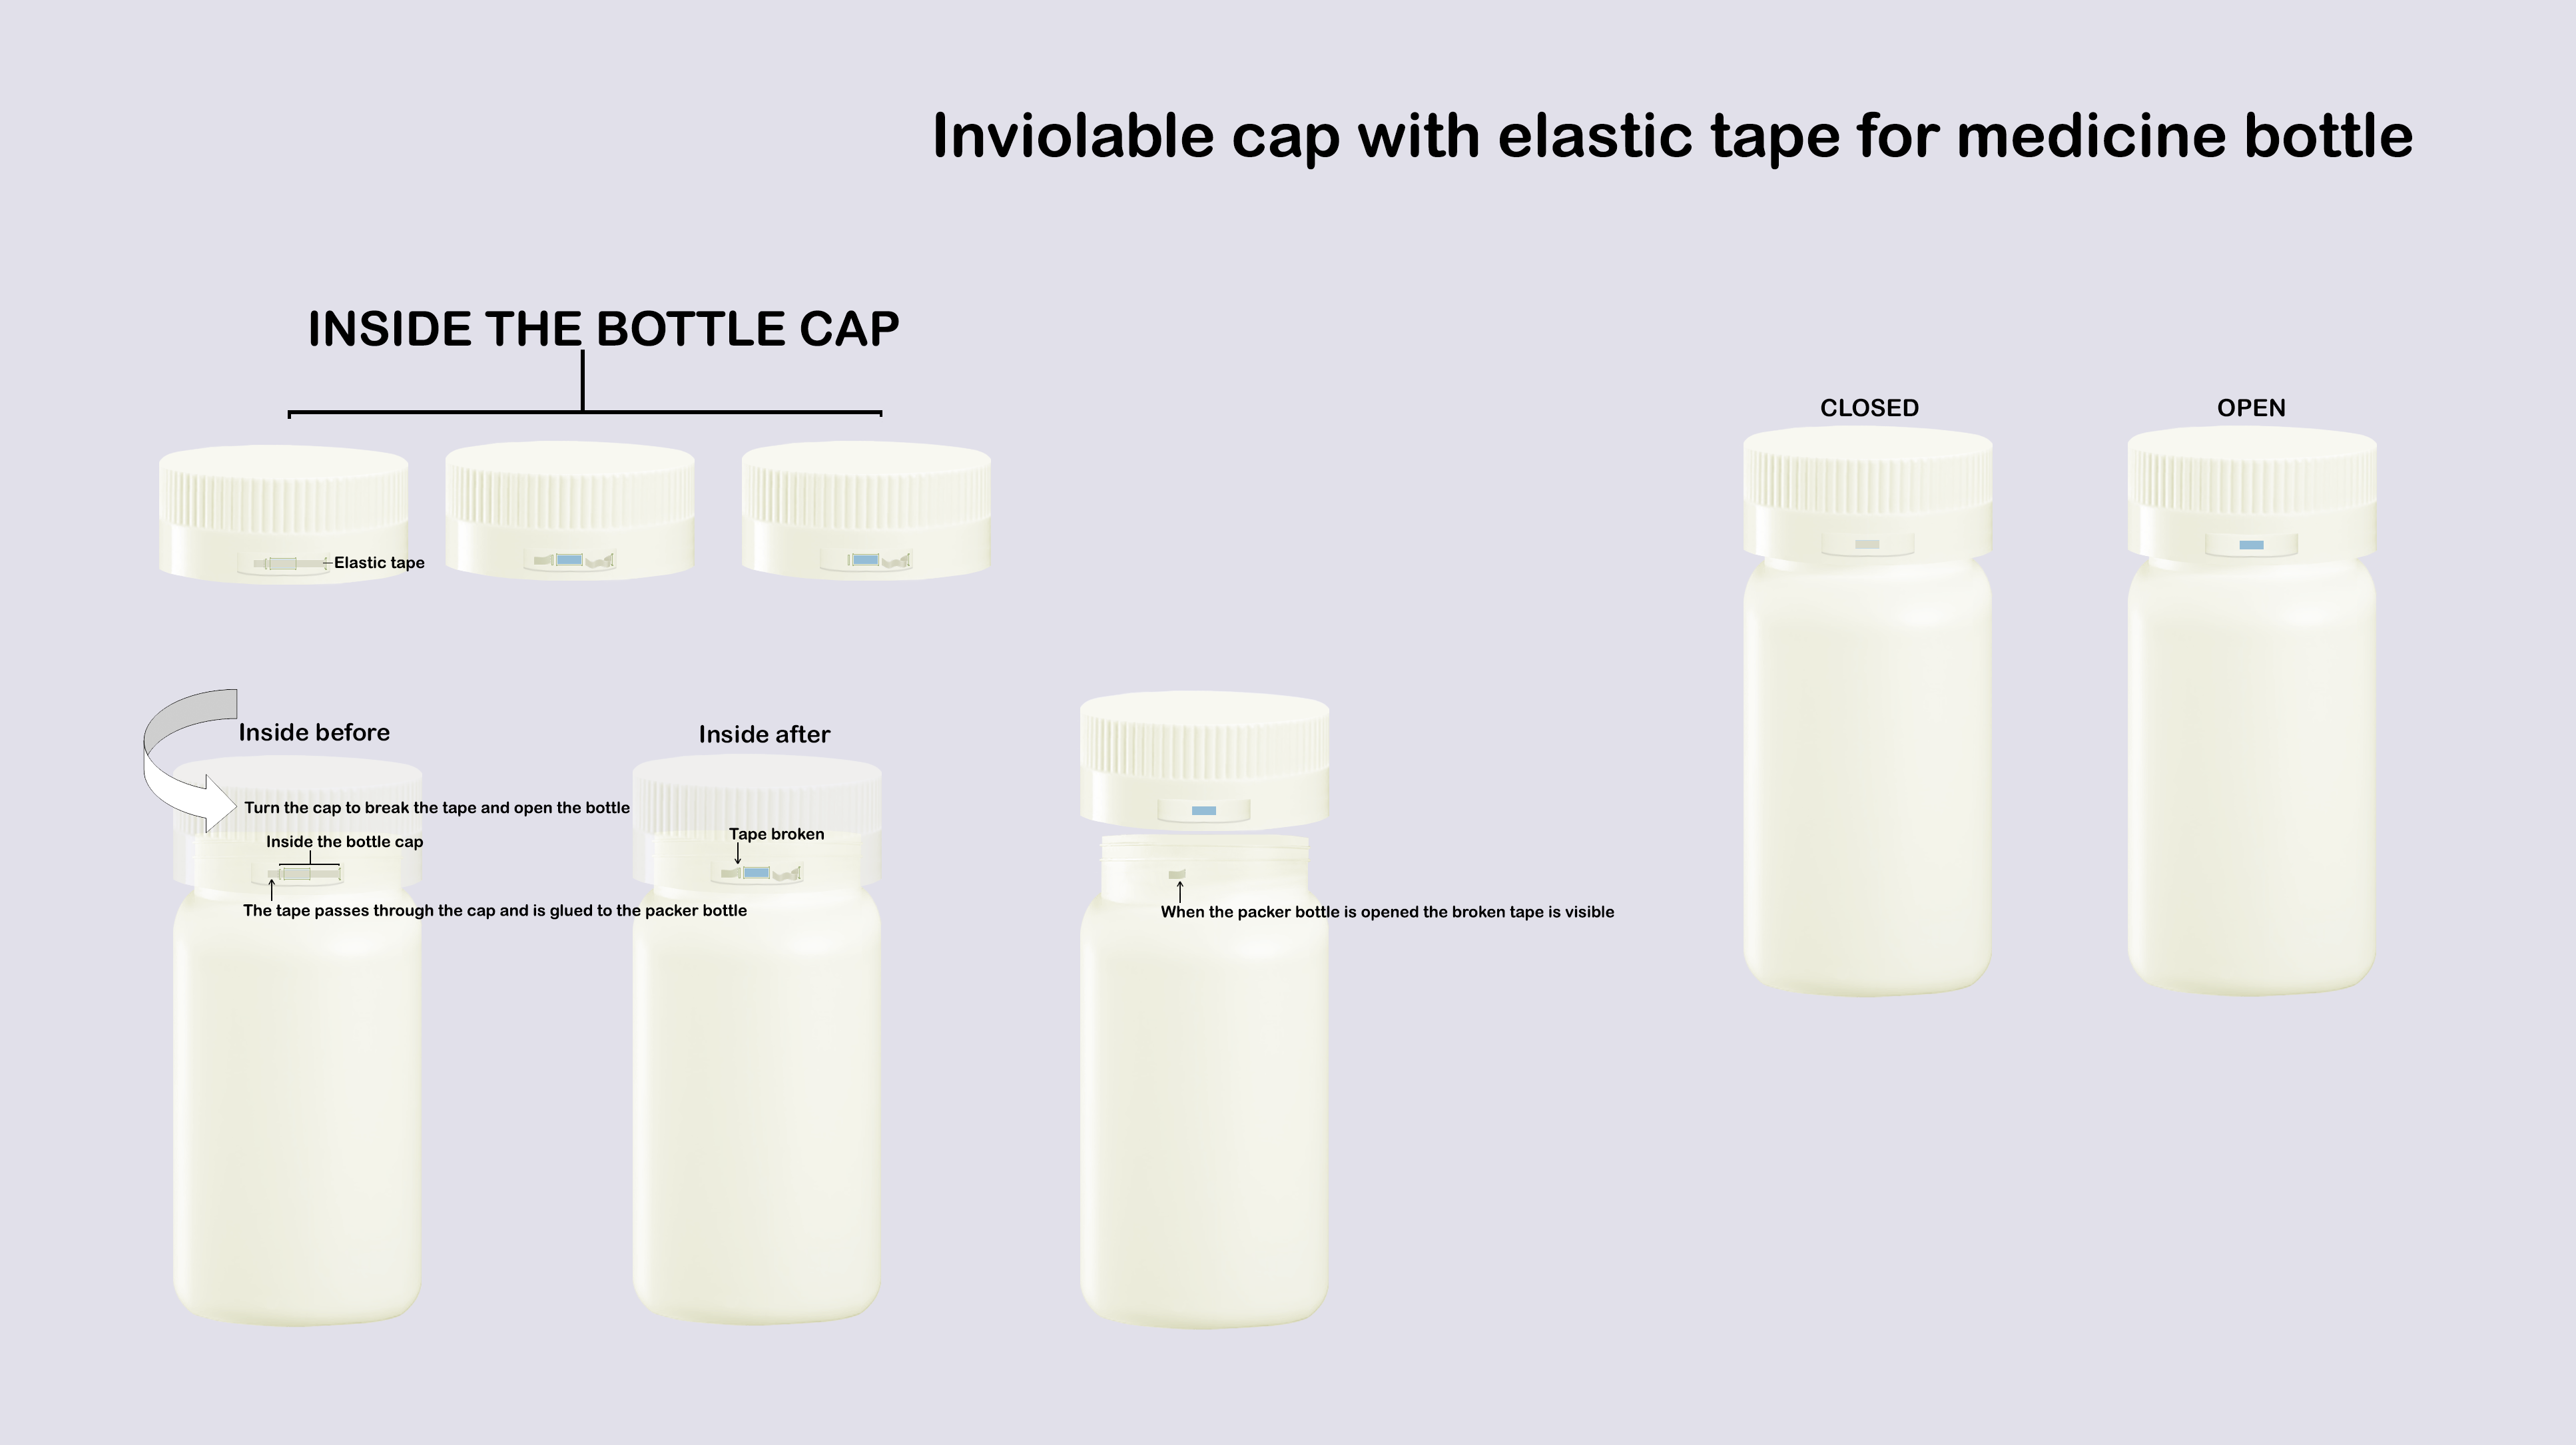 Inviolable cap with elastic tape for medicine bottle.